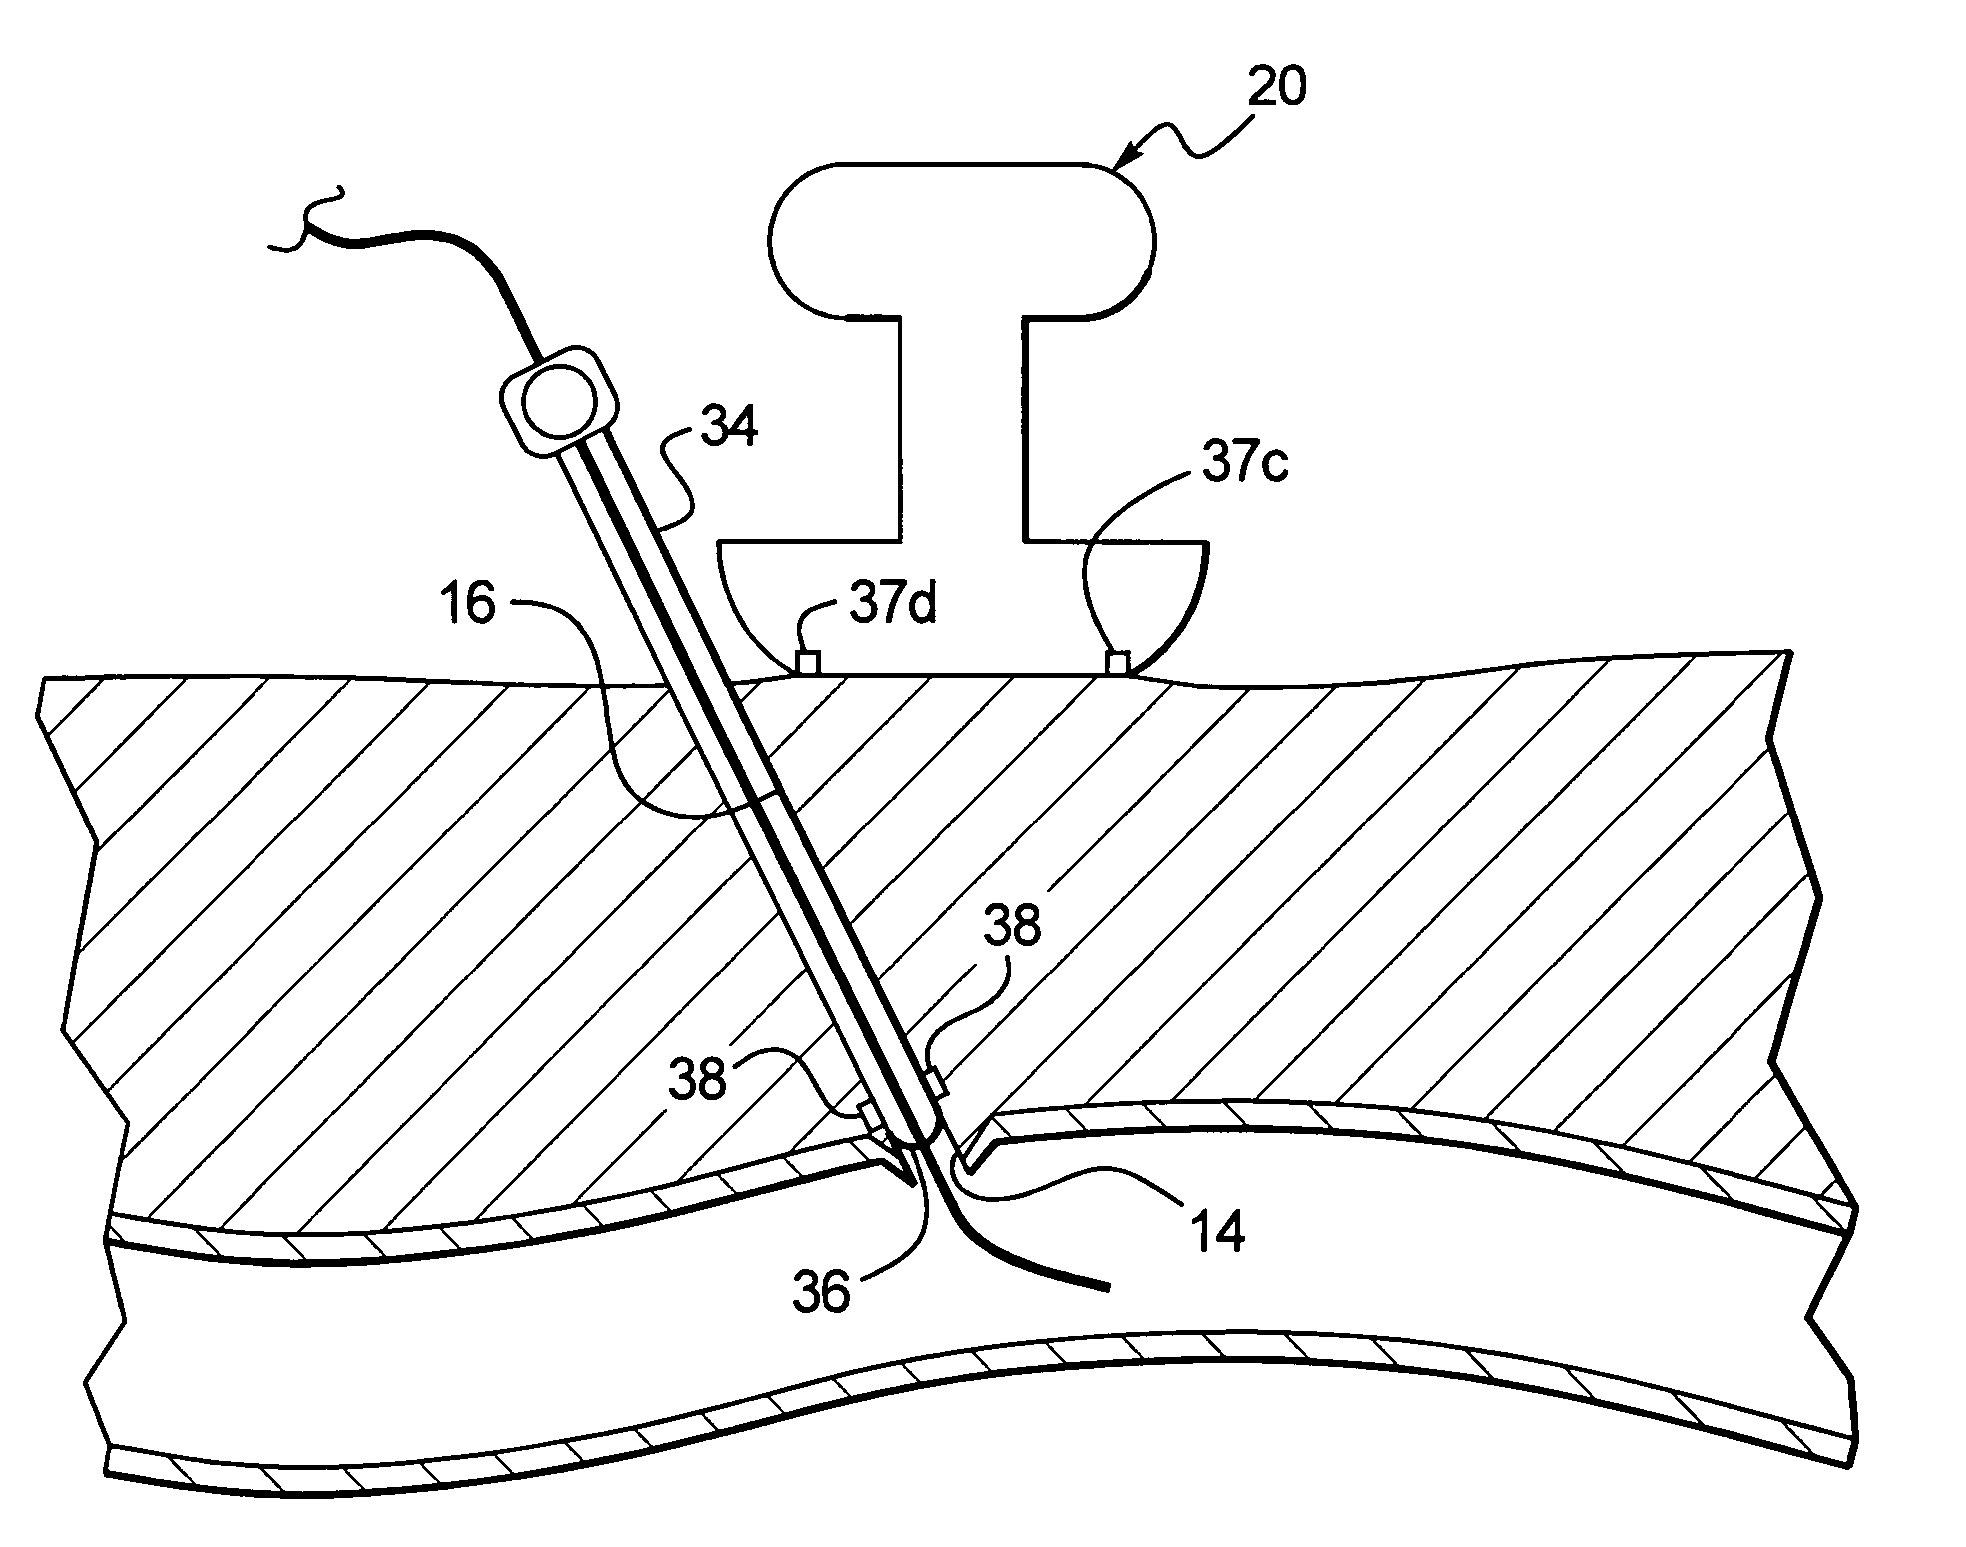 Device and method for determining the location of a vascular opening prior to application of HIFU energy to seal the opening